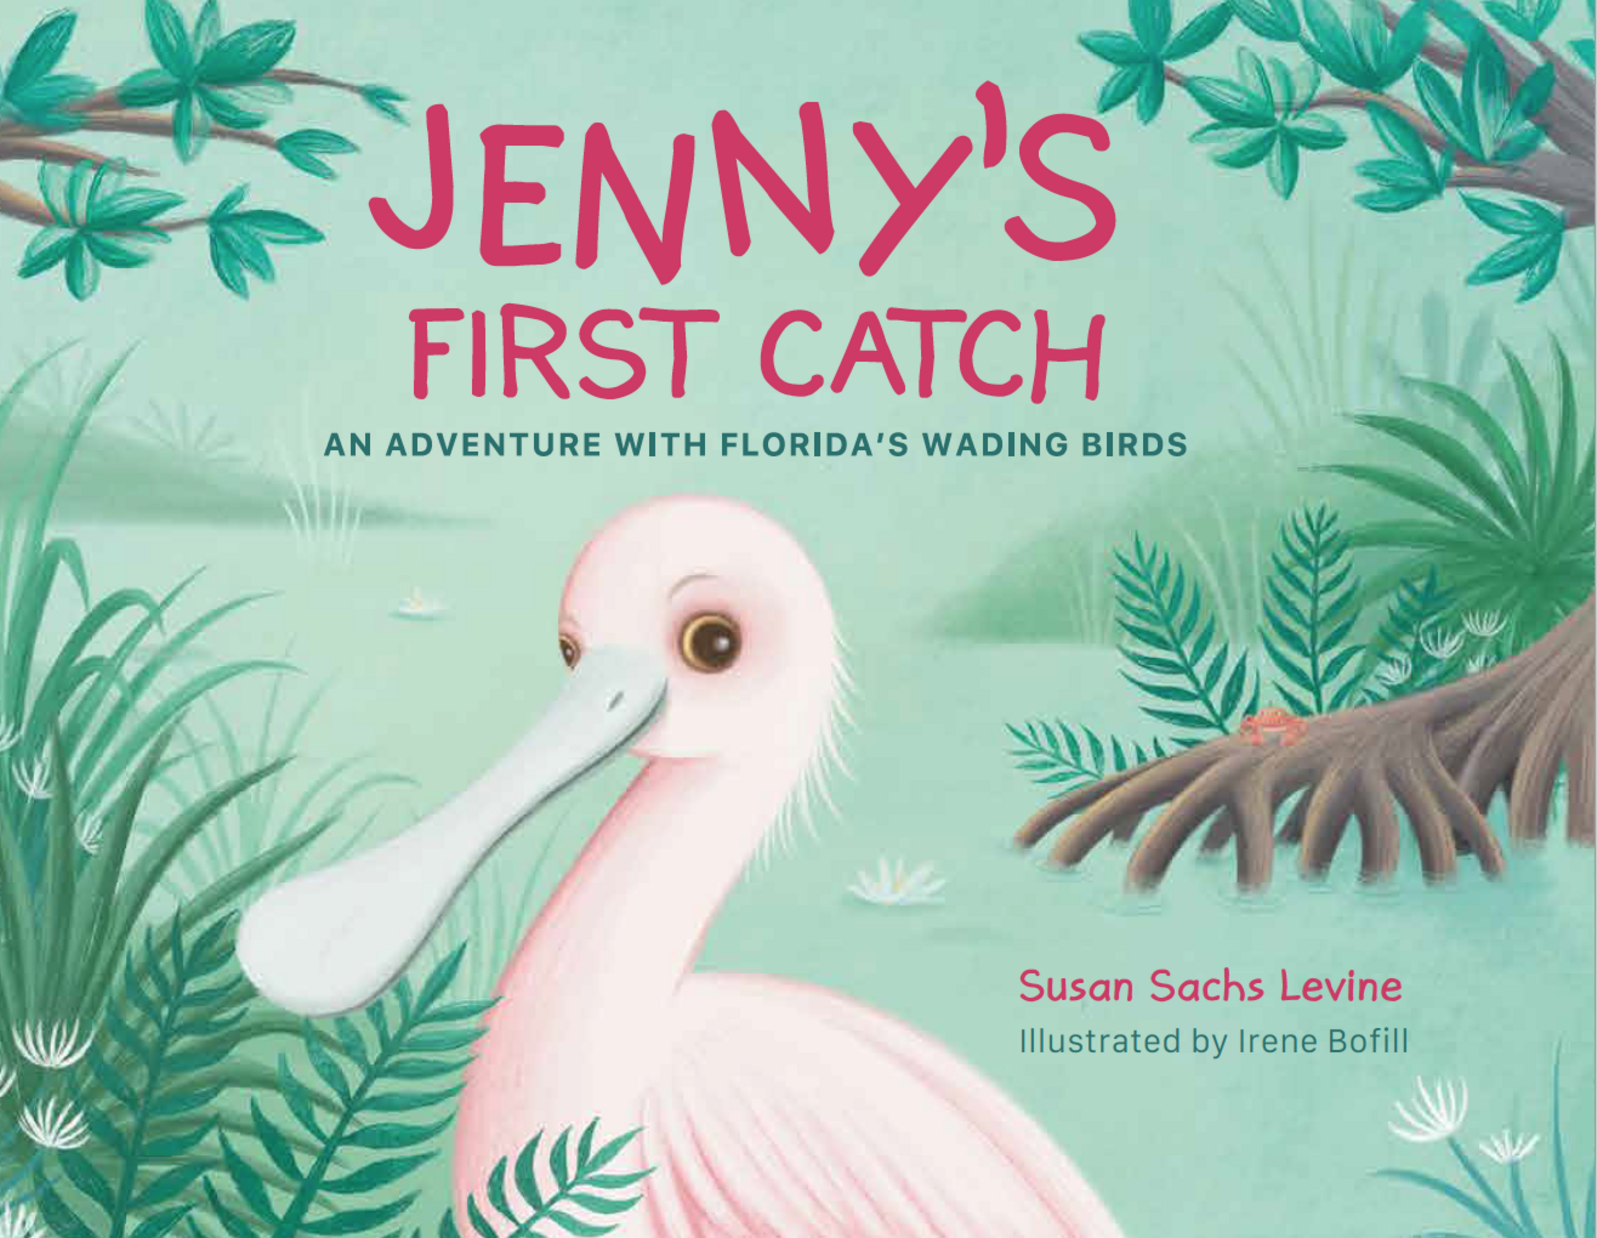 The cover of the book "Jenny's First Catch," featuring an illustrated young Roseate Spoonbill on a green background.